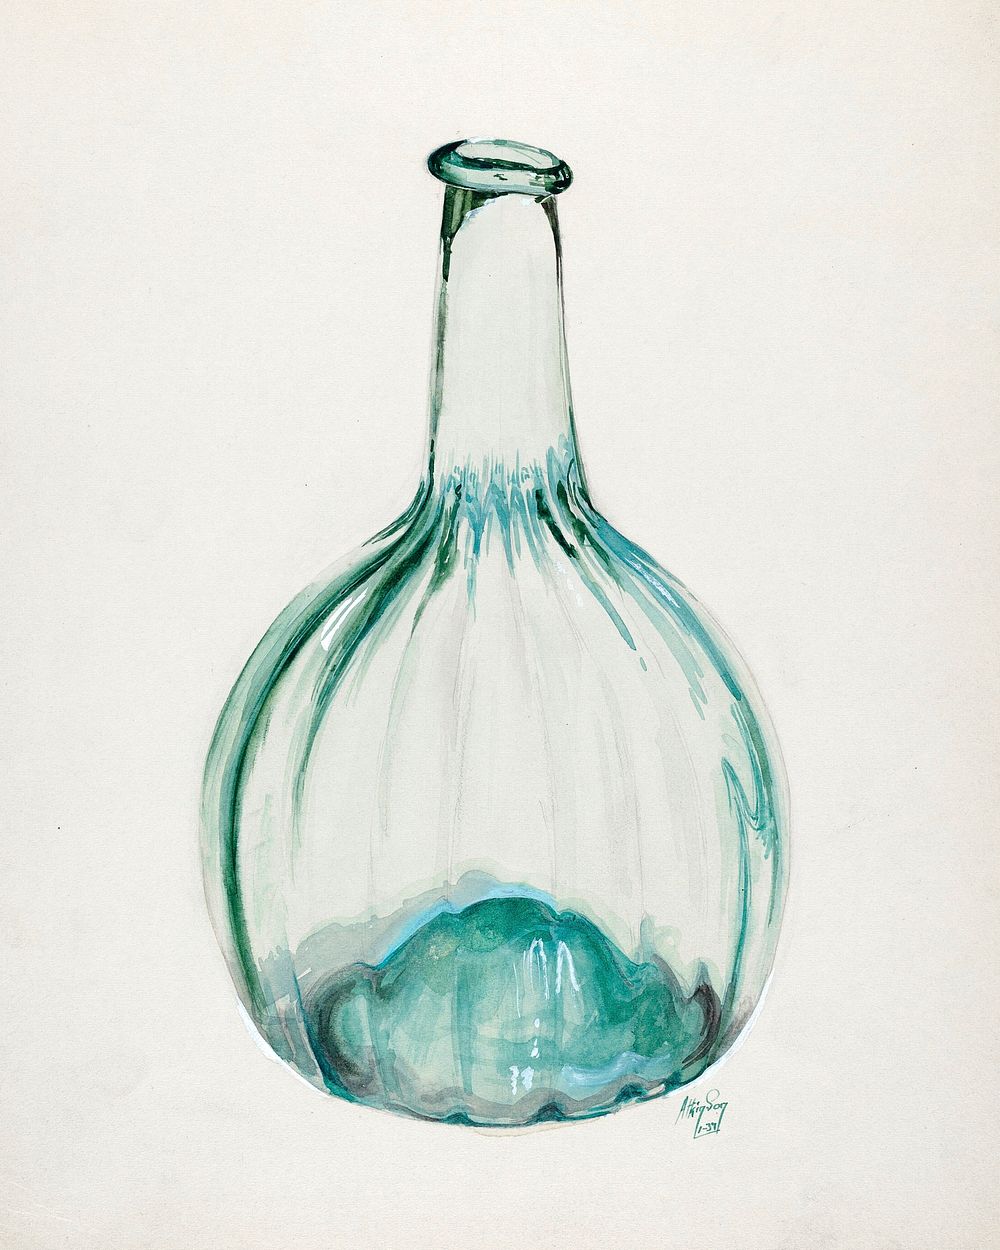 Blown Bottle (1937) by Ralph Atkinson. Original from The National Gallery of Art. Digitally enhanced by rawpixel.